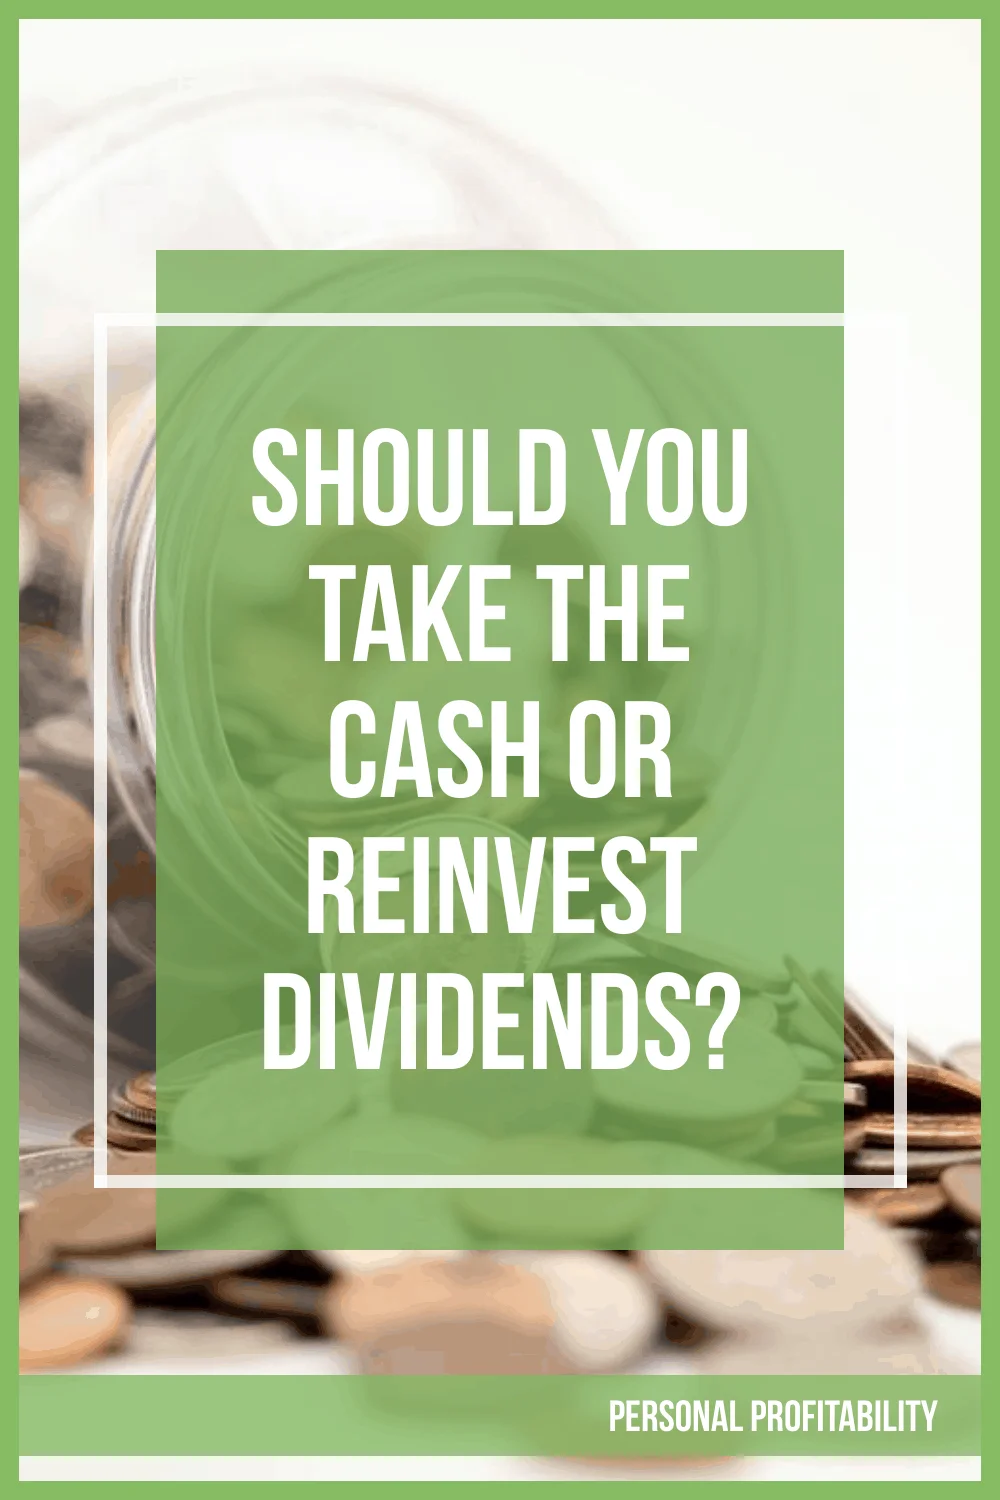 Take The Cash or Reinvest